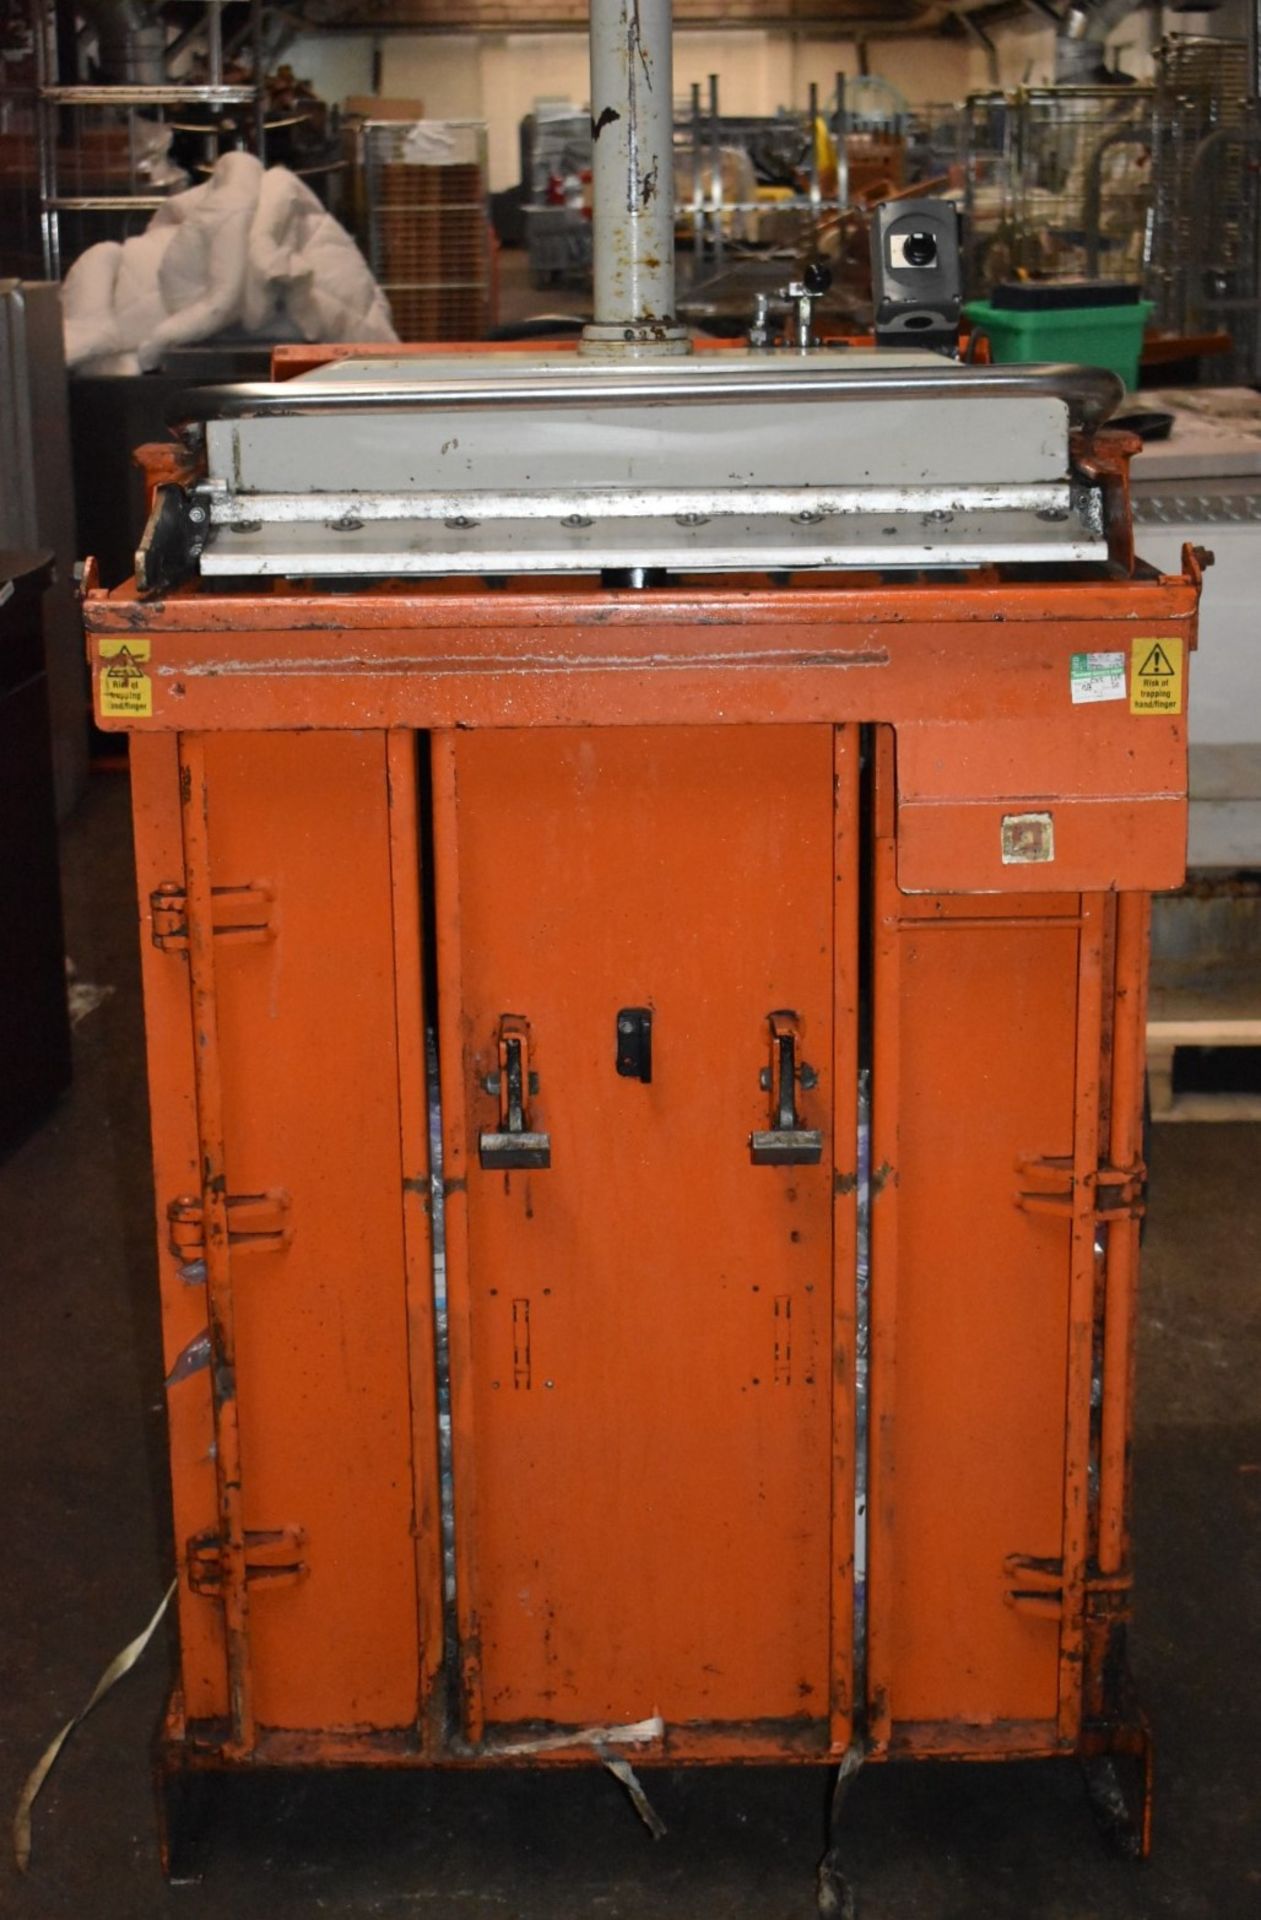 1 x Orwak 5010 Hydraulic Press Compact Cardboard Baler - Used For Compacting Recyclable or Non- - Image 7 of 15